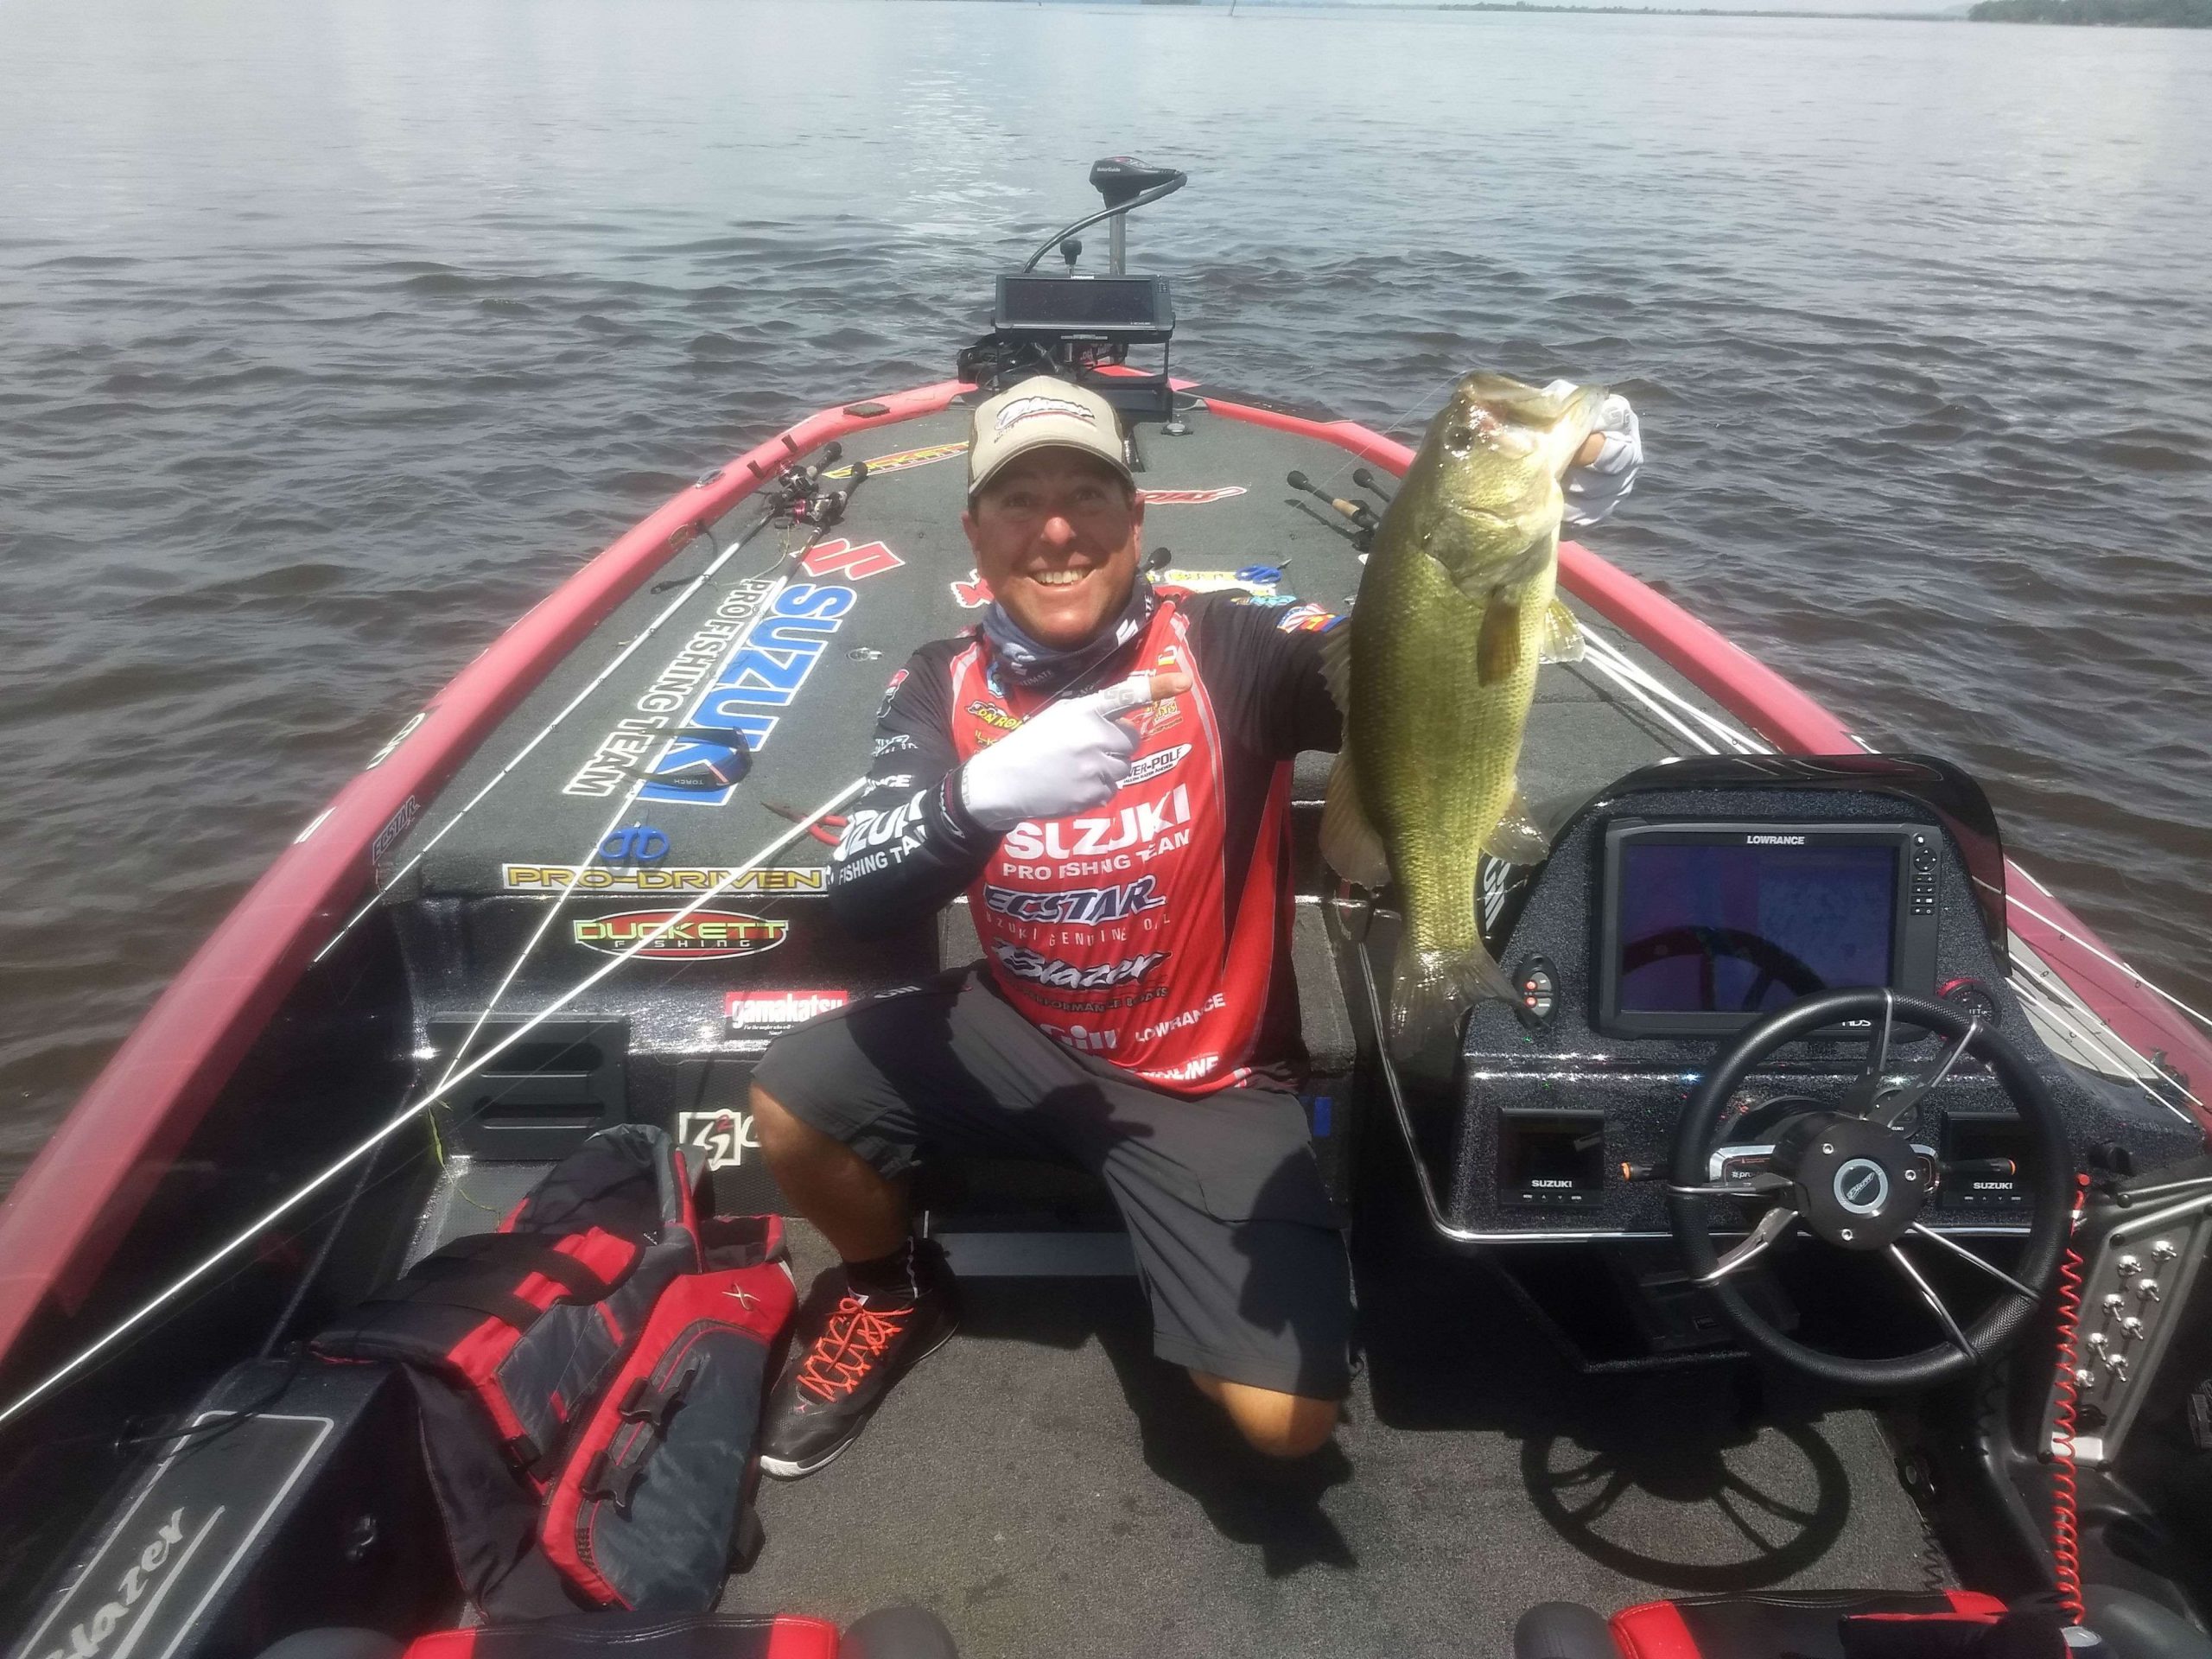 Rojas upgrades with an awesome 4-pounder.